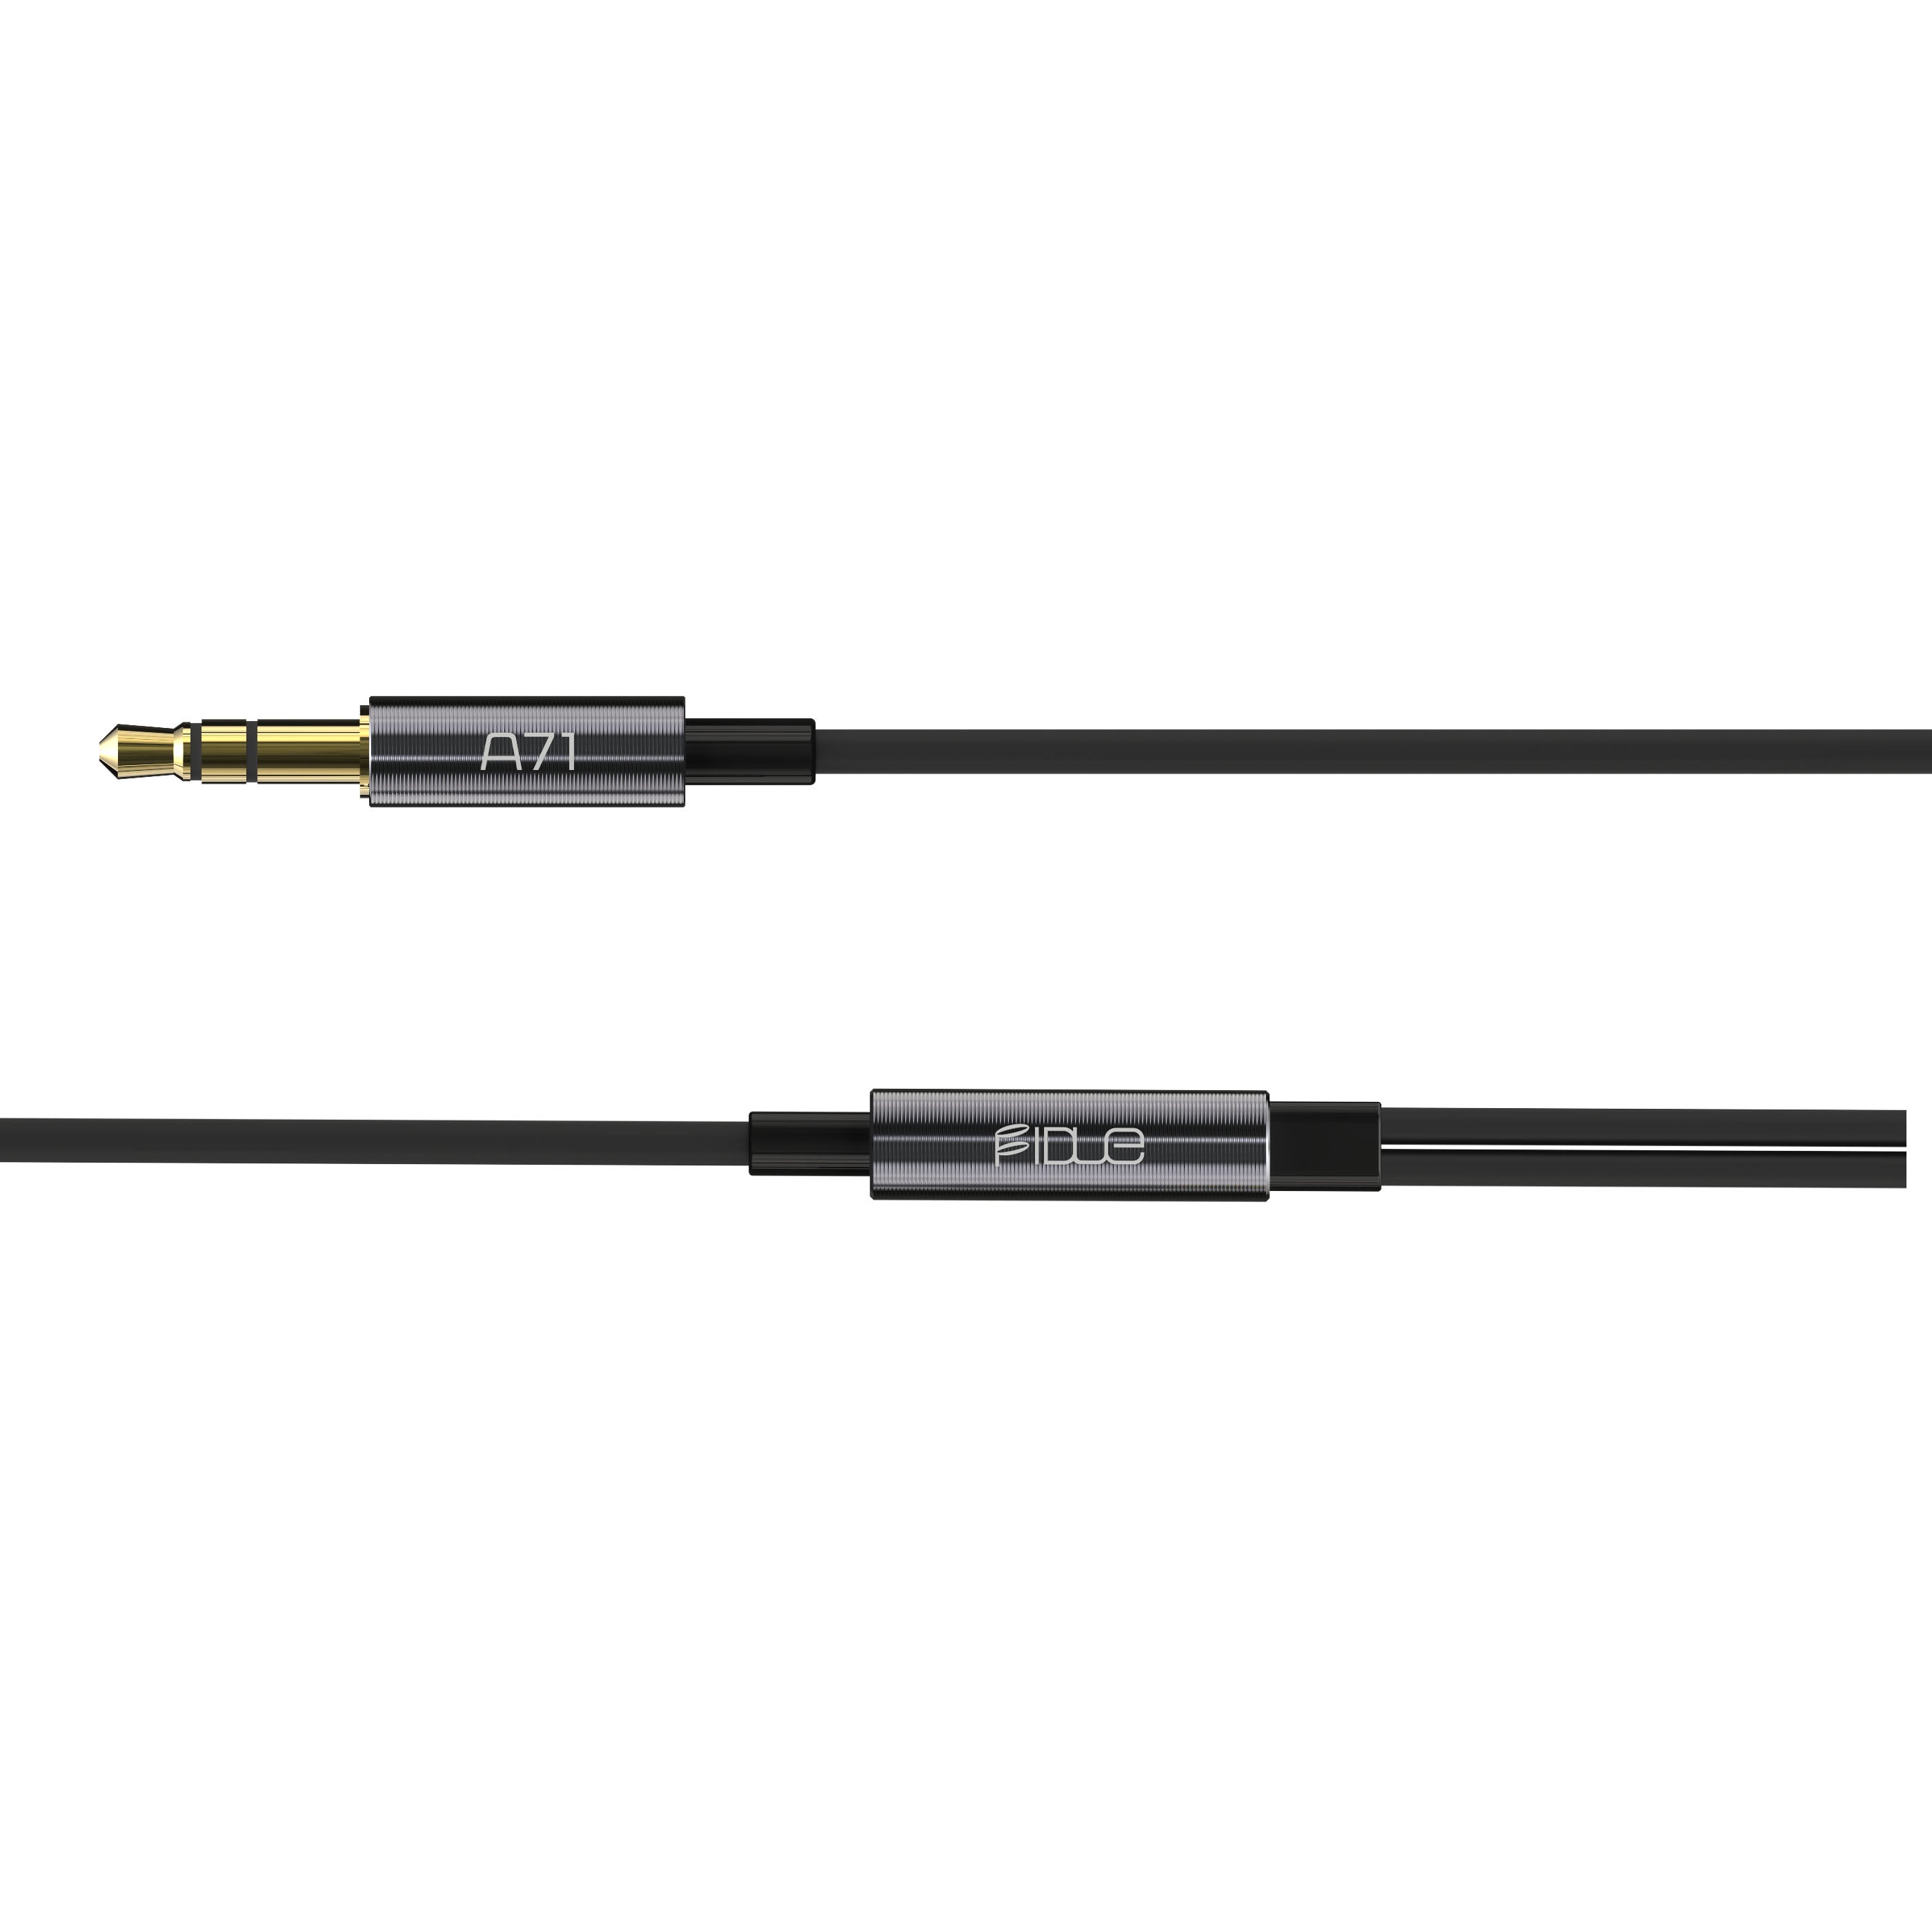 Buy FIDUE A71 Earphone at HiFiNage in India with warranty.